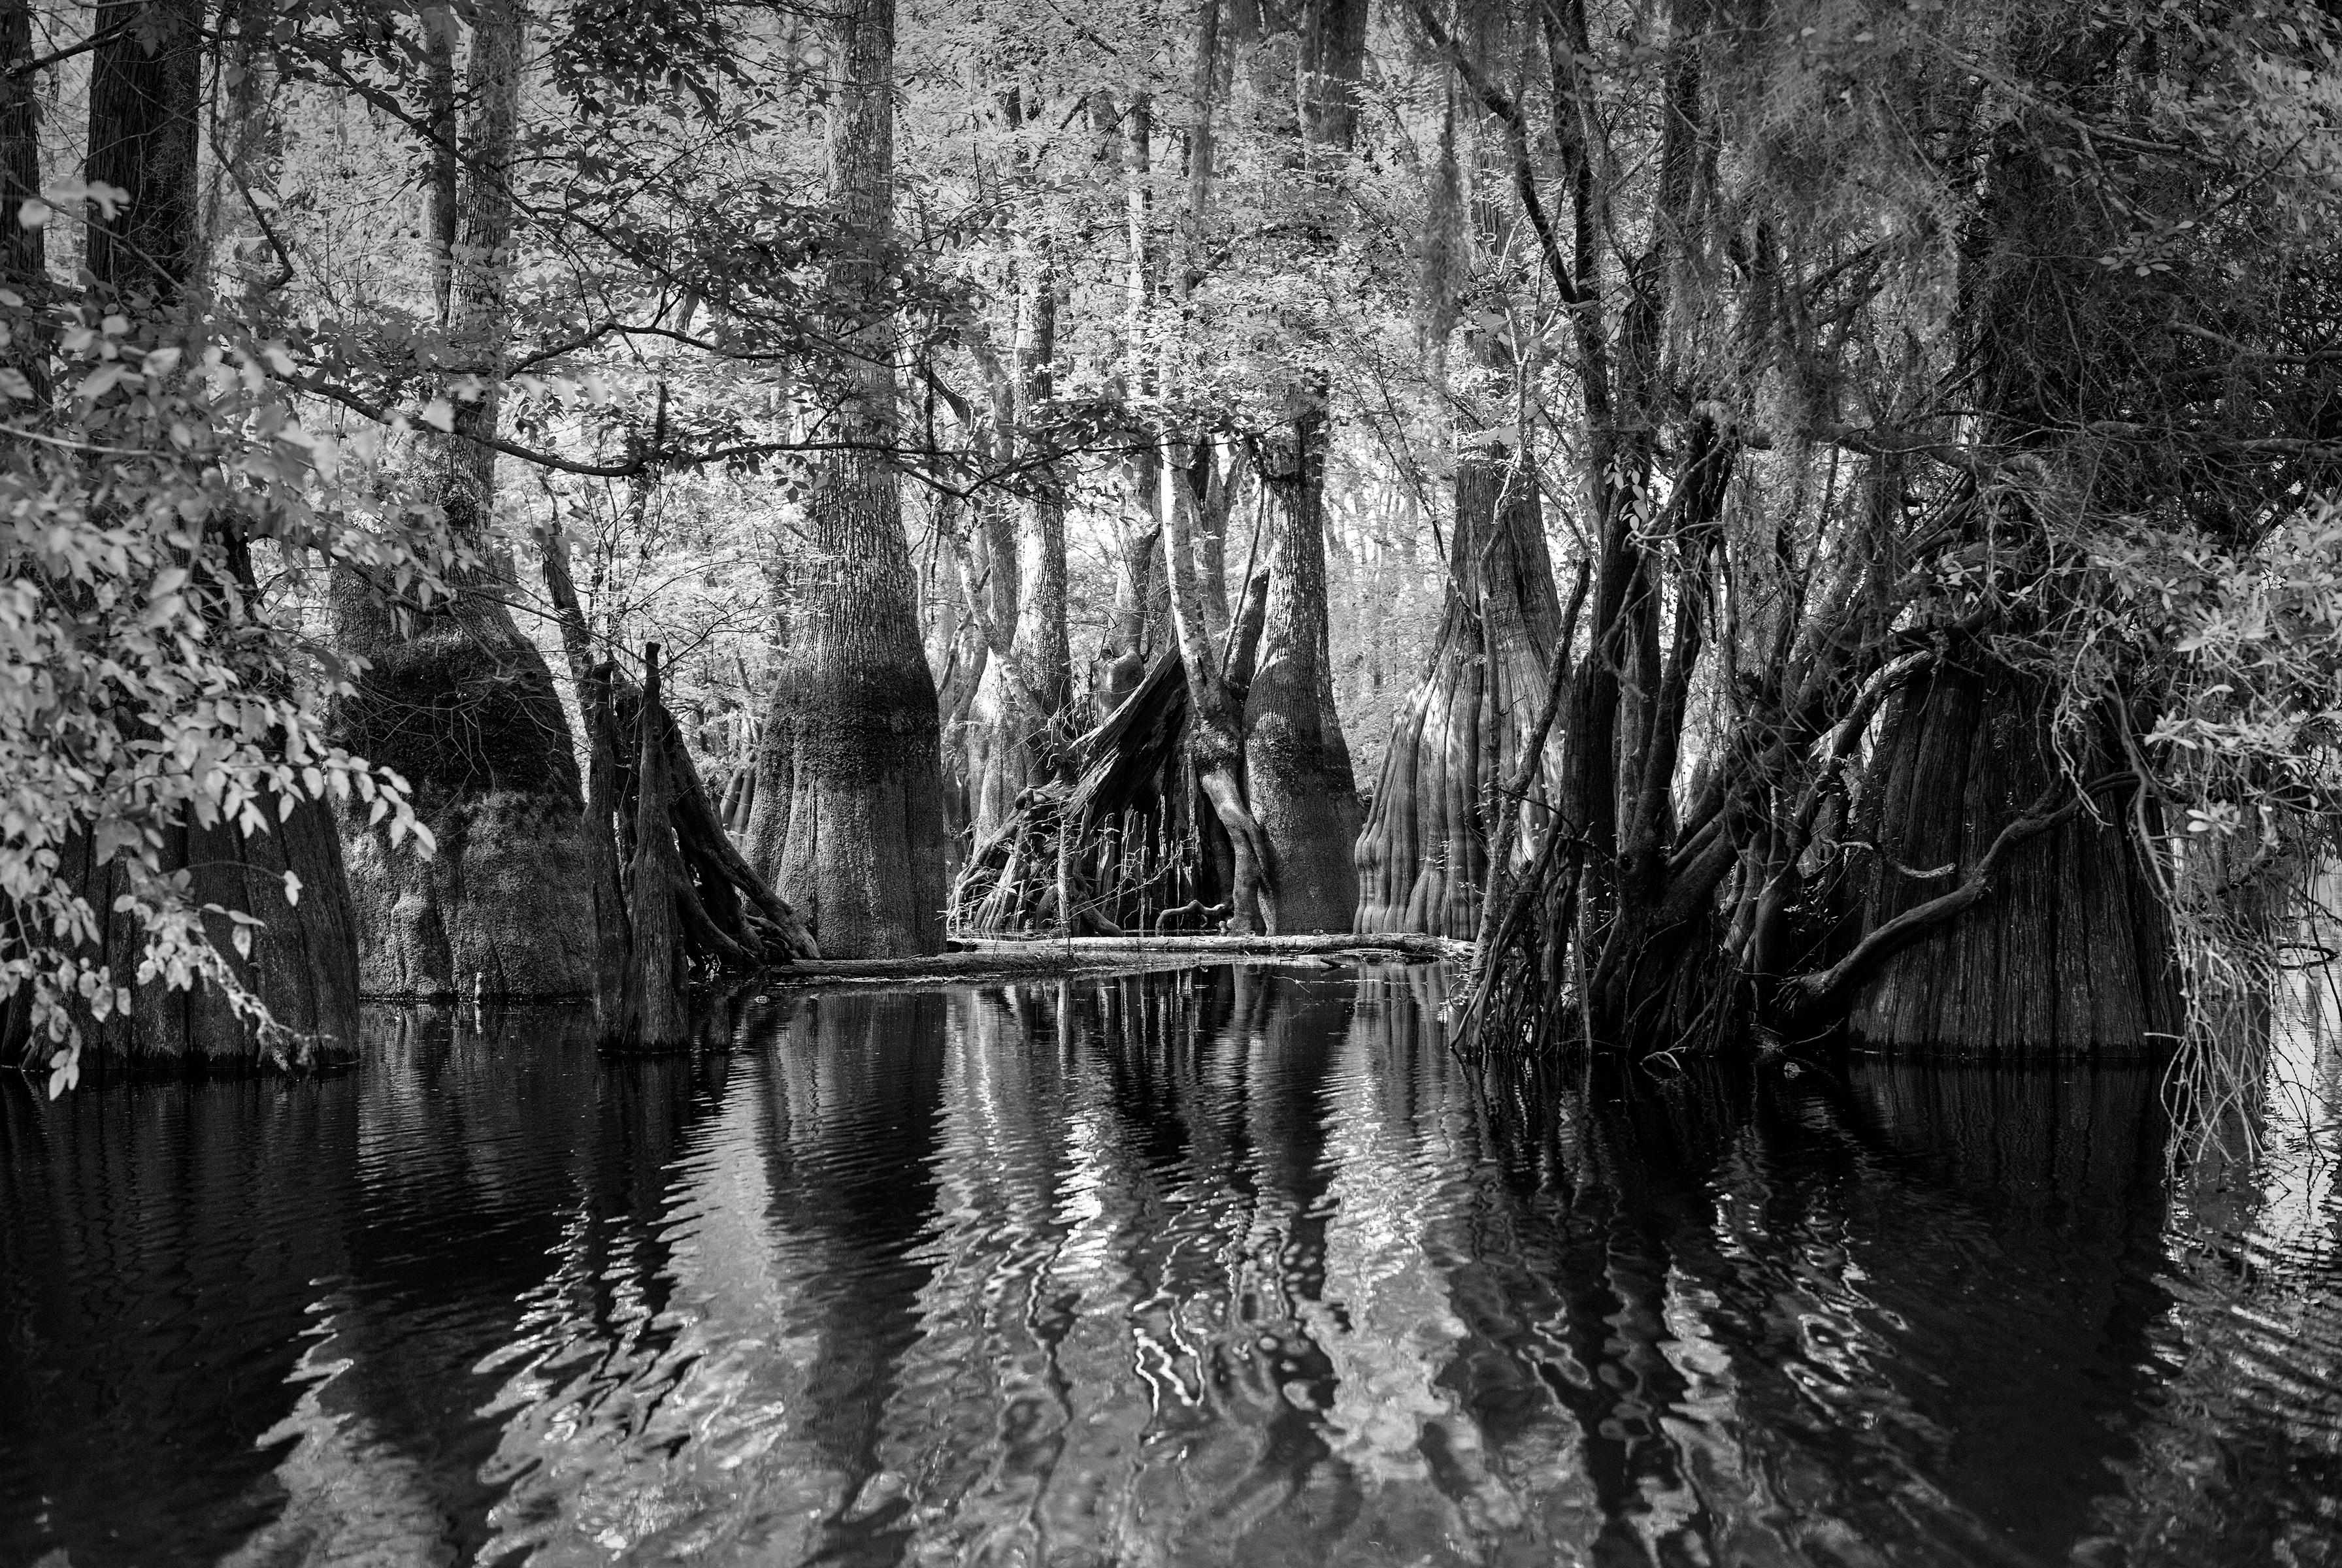 Cecilia Montalvo & Charlie McCullers Black and White Photograph - 'Sanctuary' - Ebenizer Creek southern photography, trees, swamp